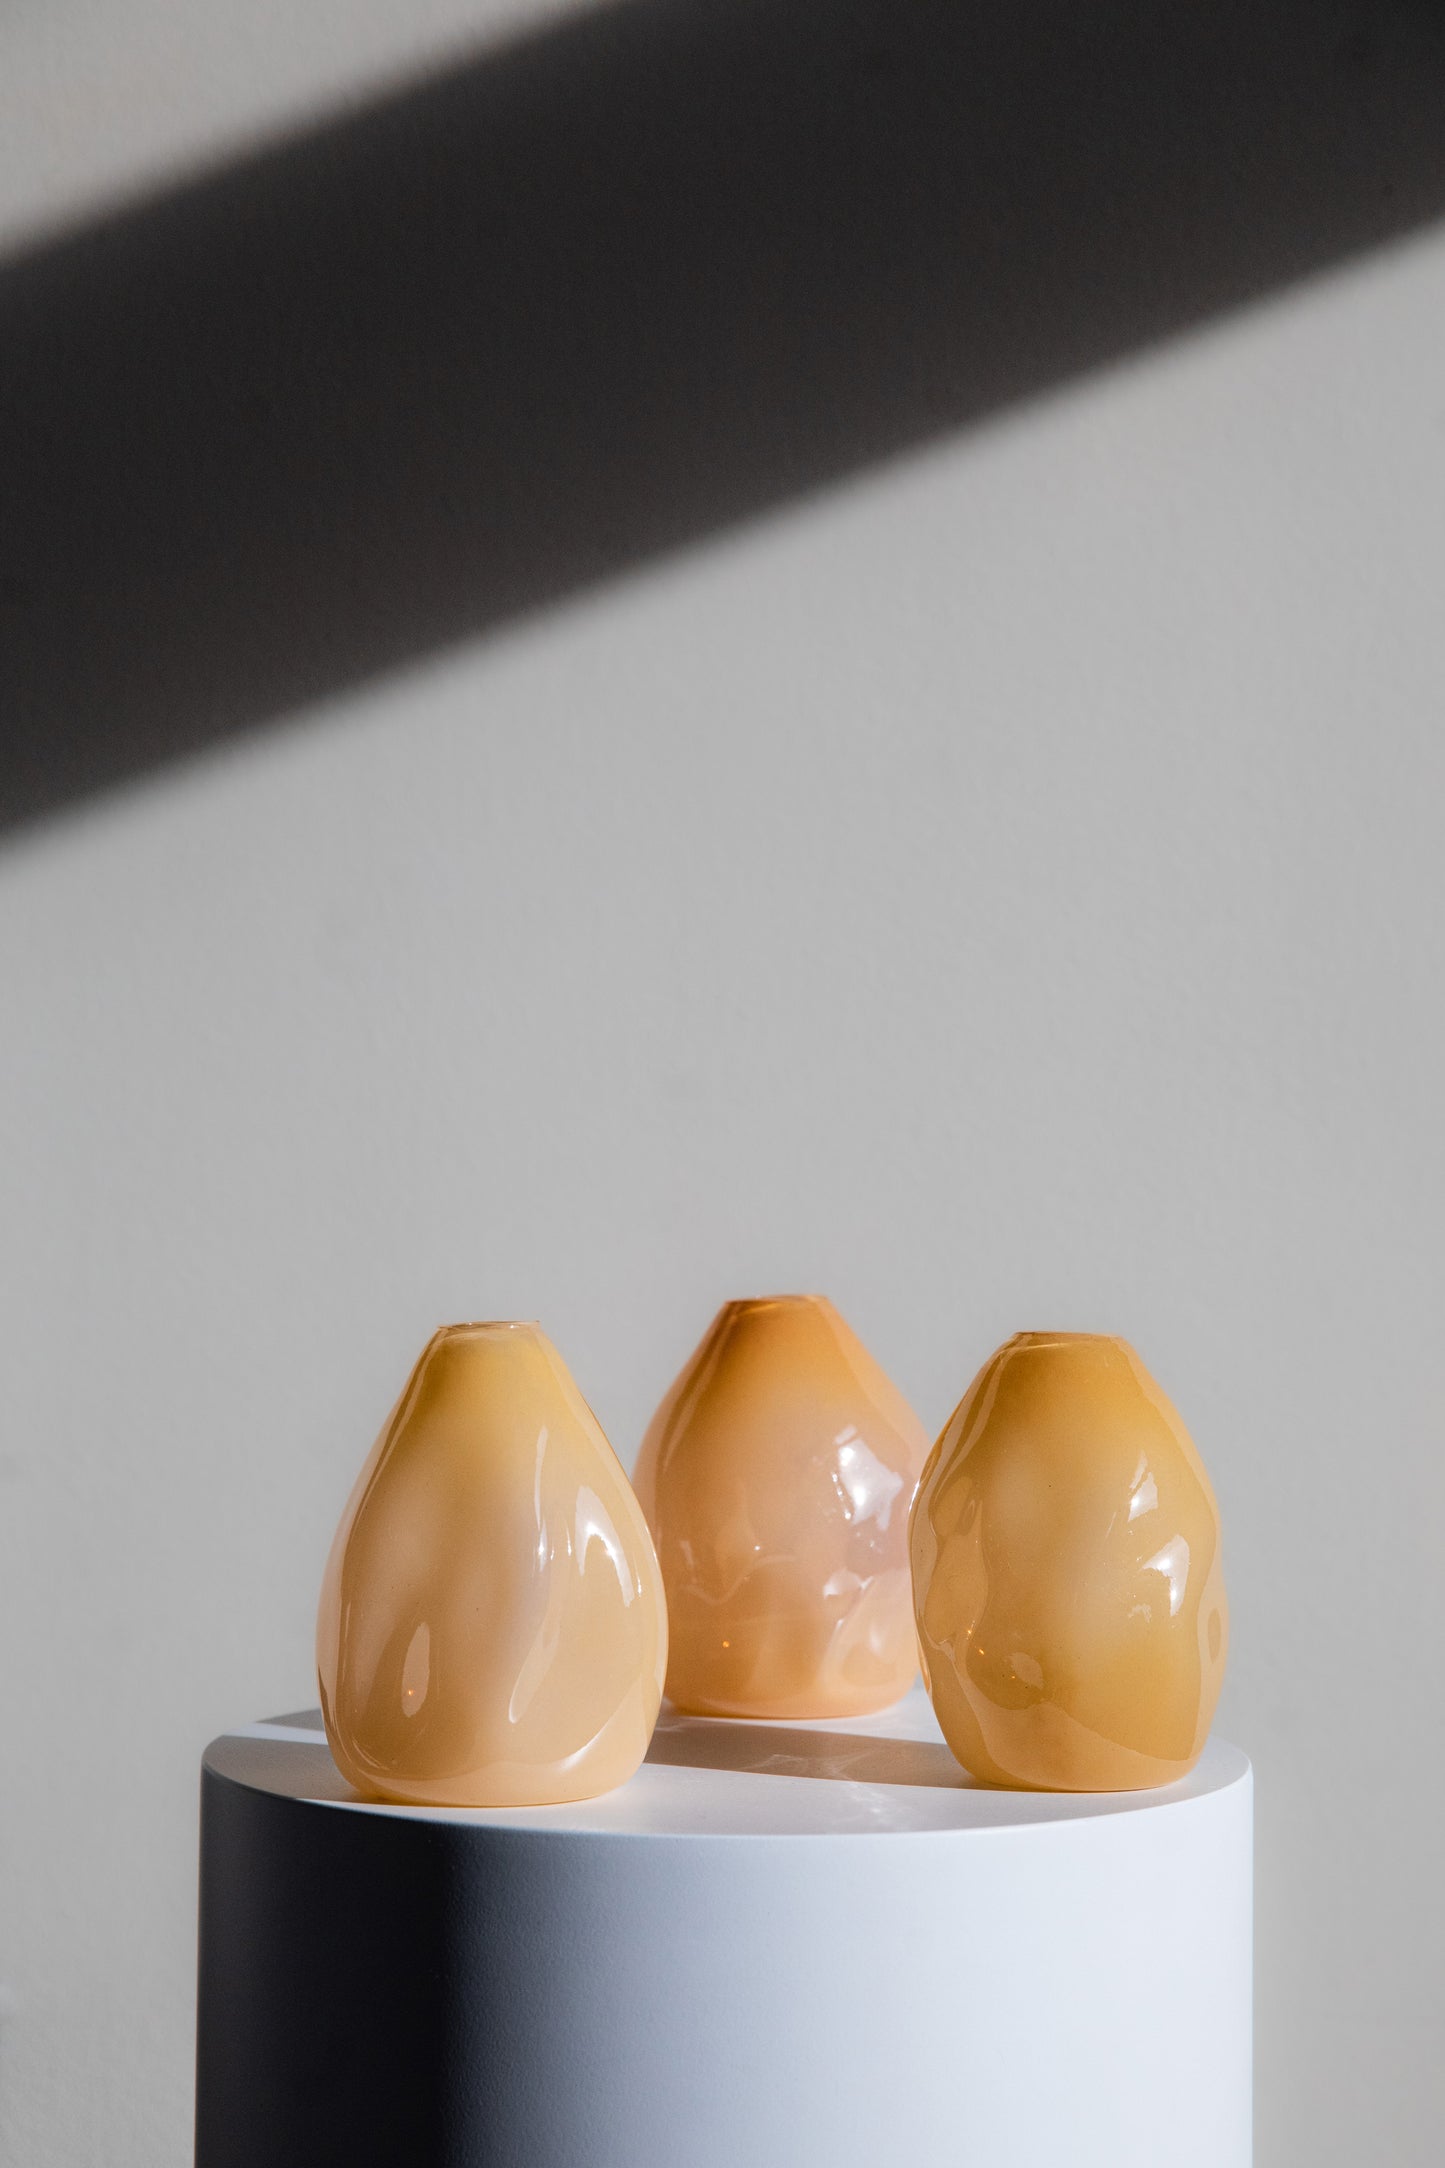 Three Small Wavy Glass Vases in Opaque Gold-Beige Made by a Glassblower